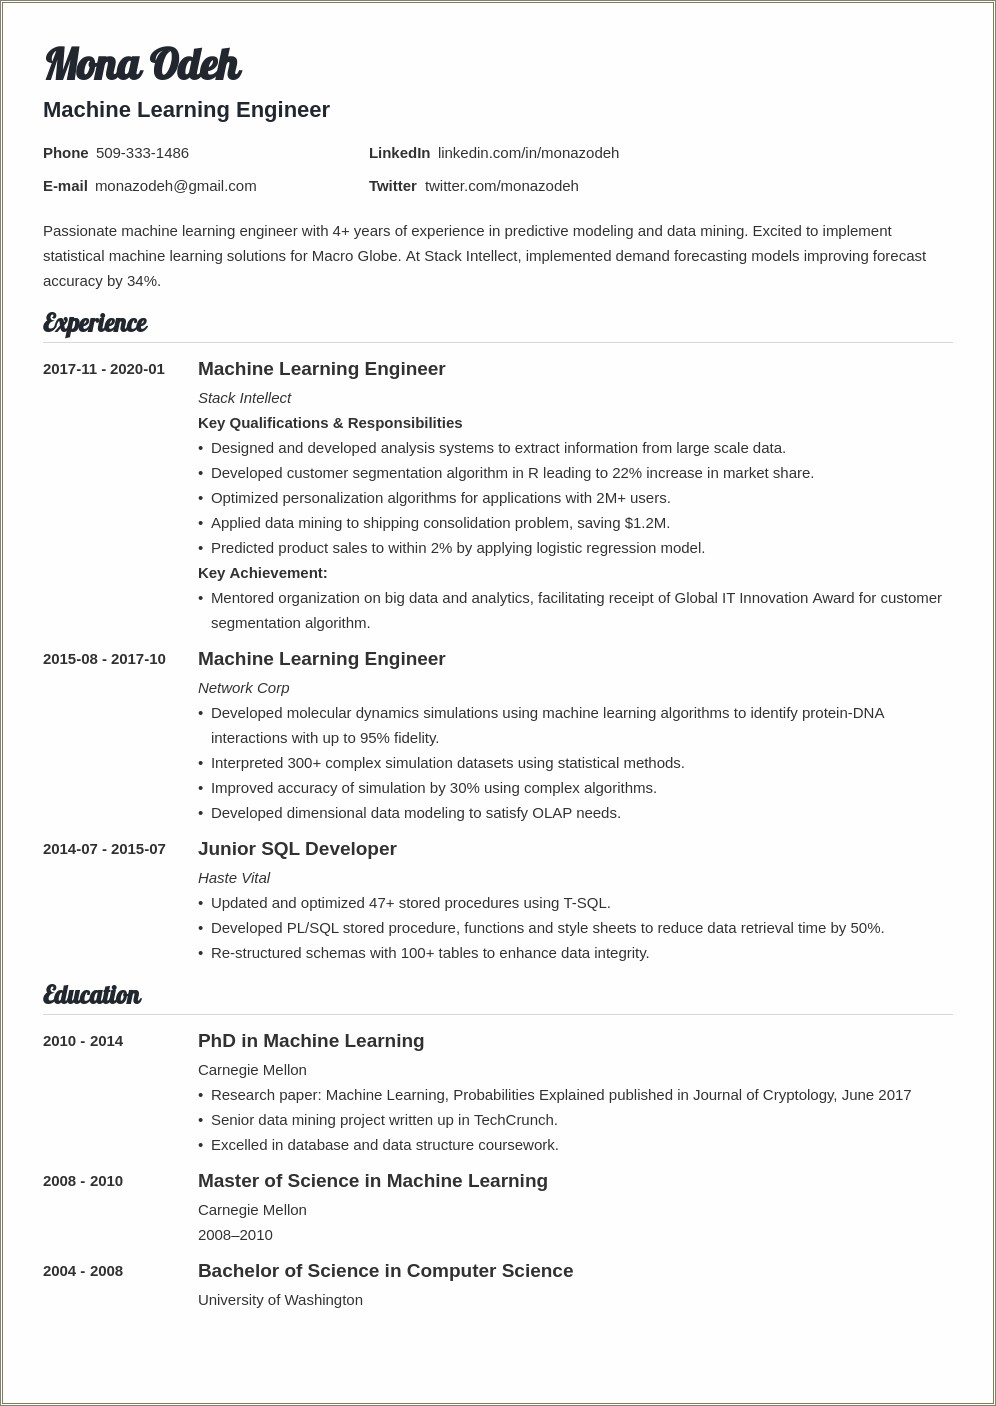 Resume With Artificial Intelligence Skills Required